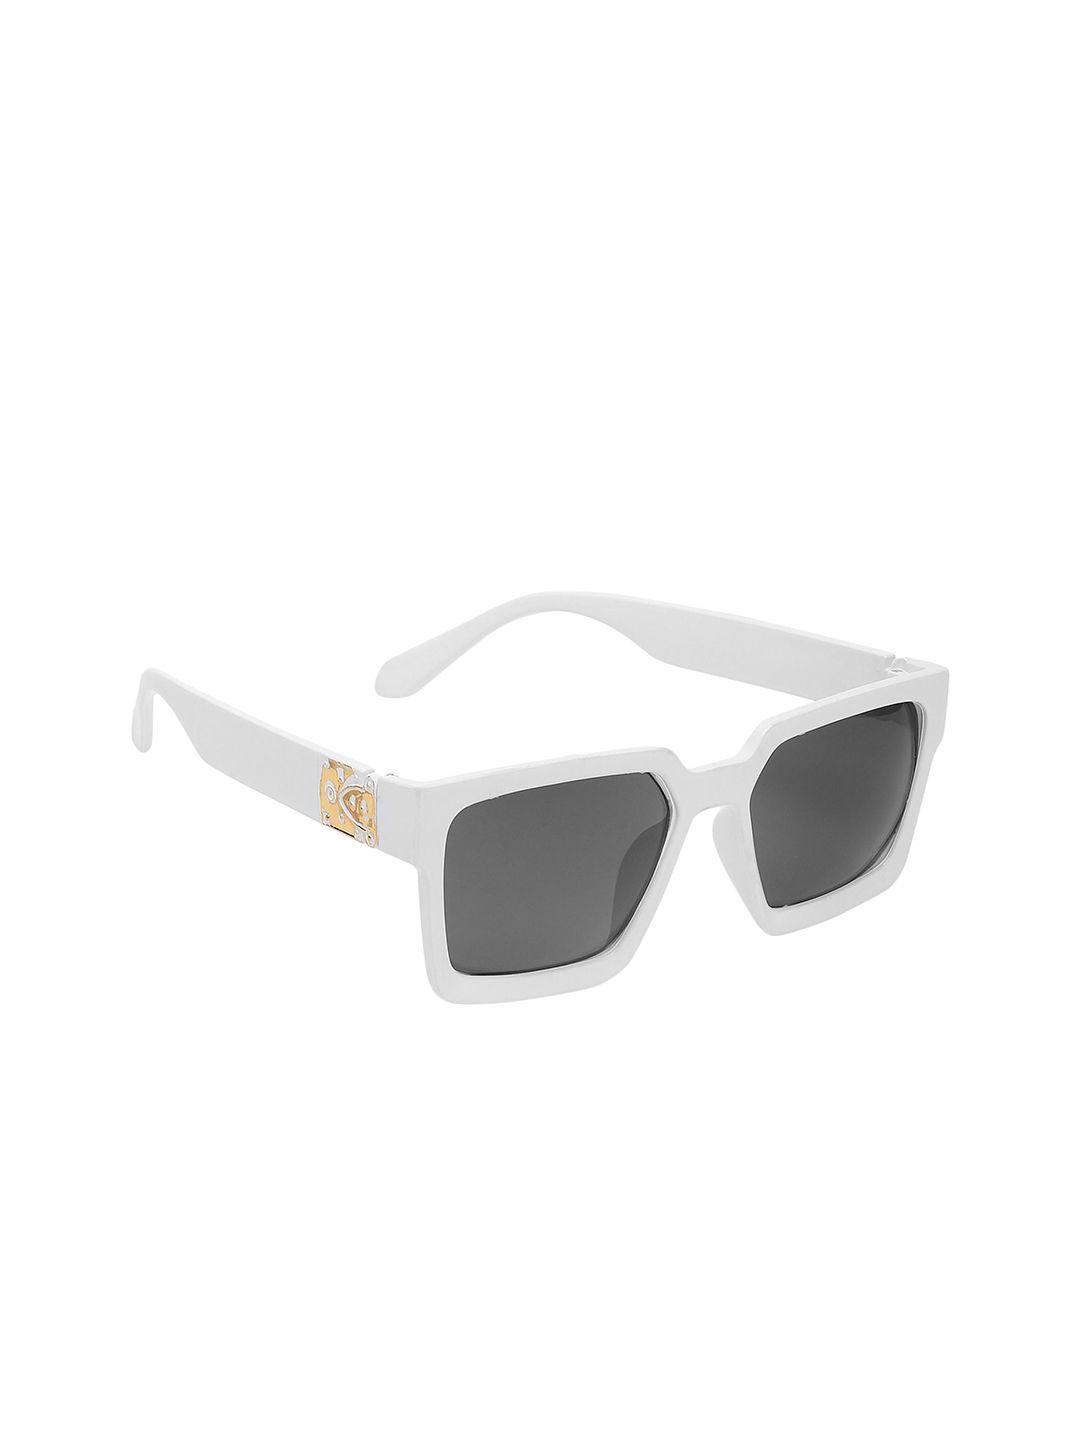 criba unisex other sunglasses with uv protected lens crb_grywht_jm